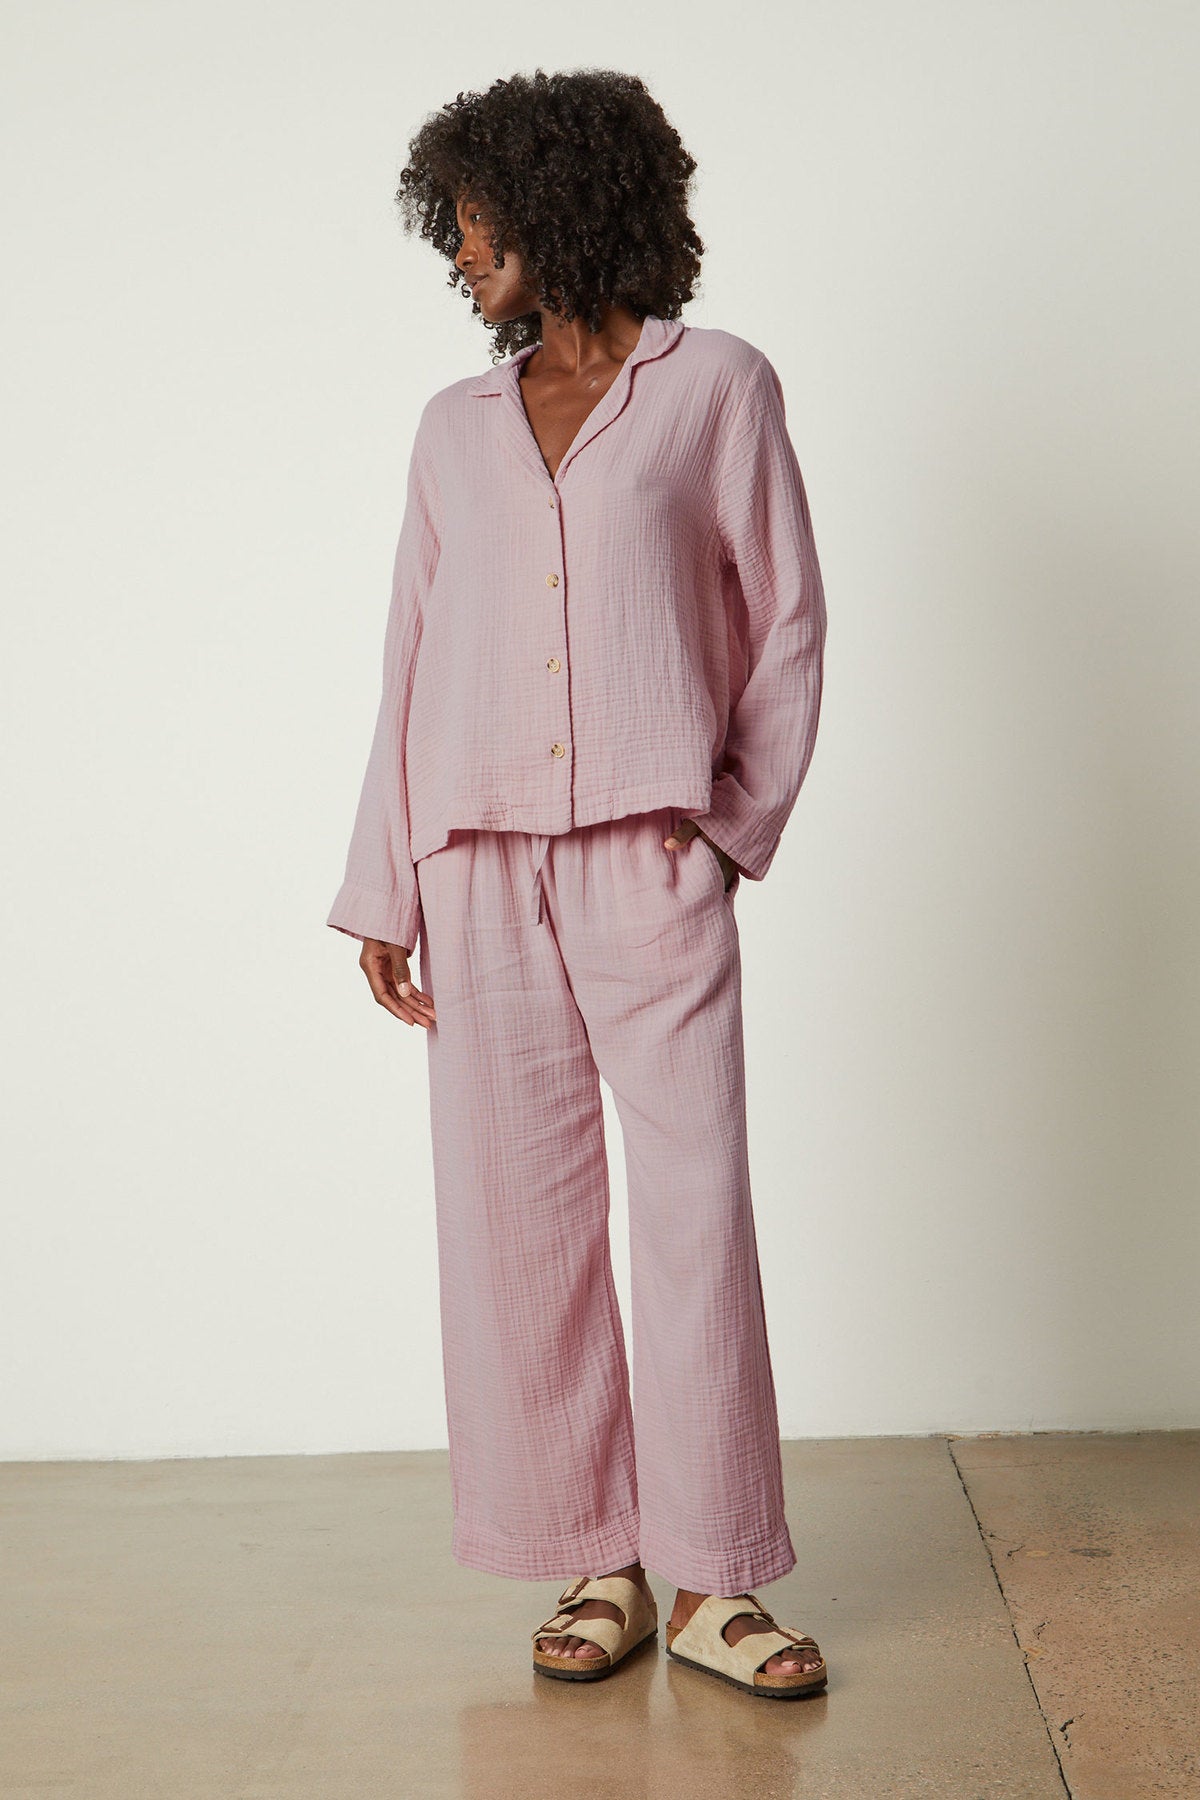   The model is wearing a pink linen Jenny Graham Home PAJAMA PANT set. 